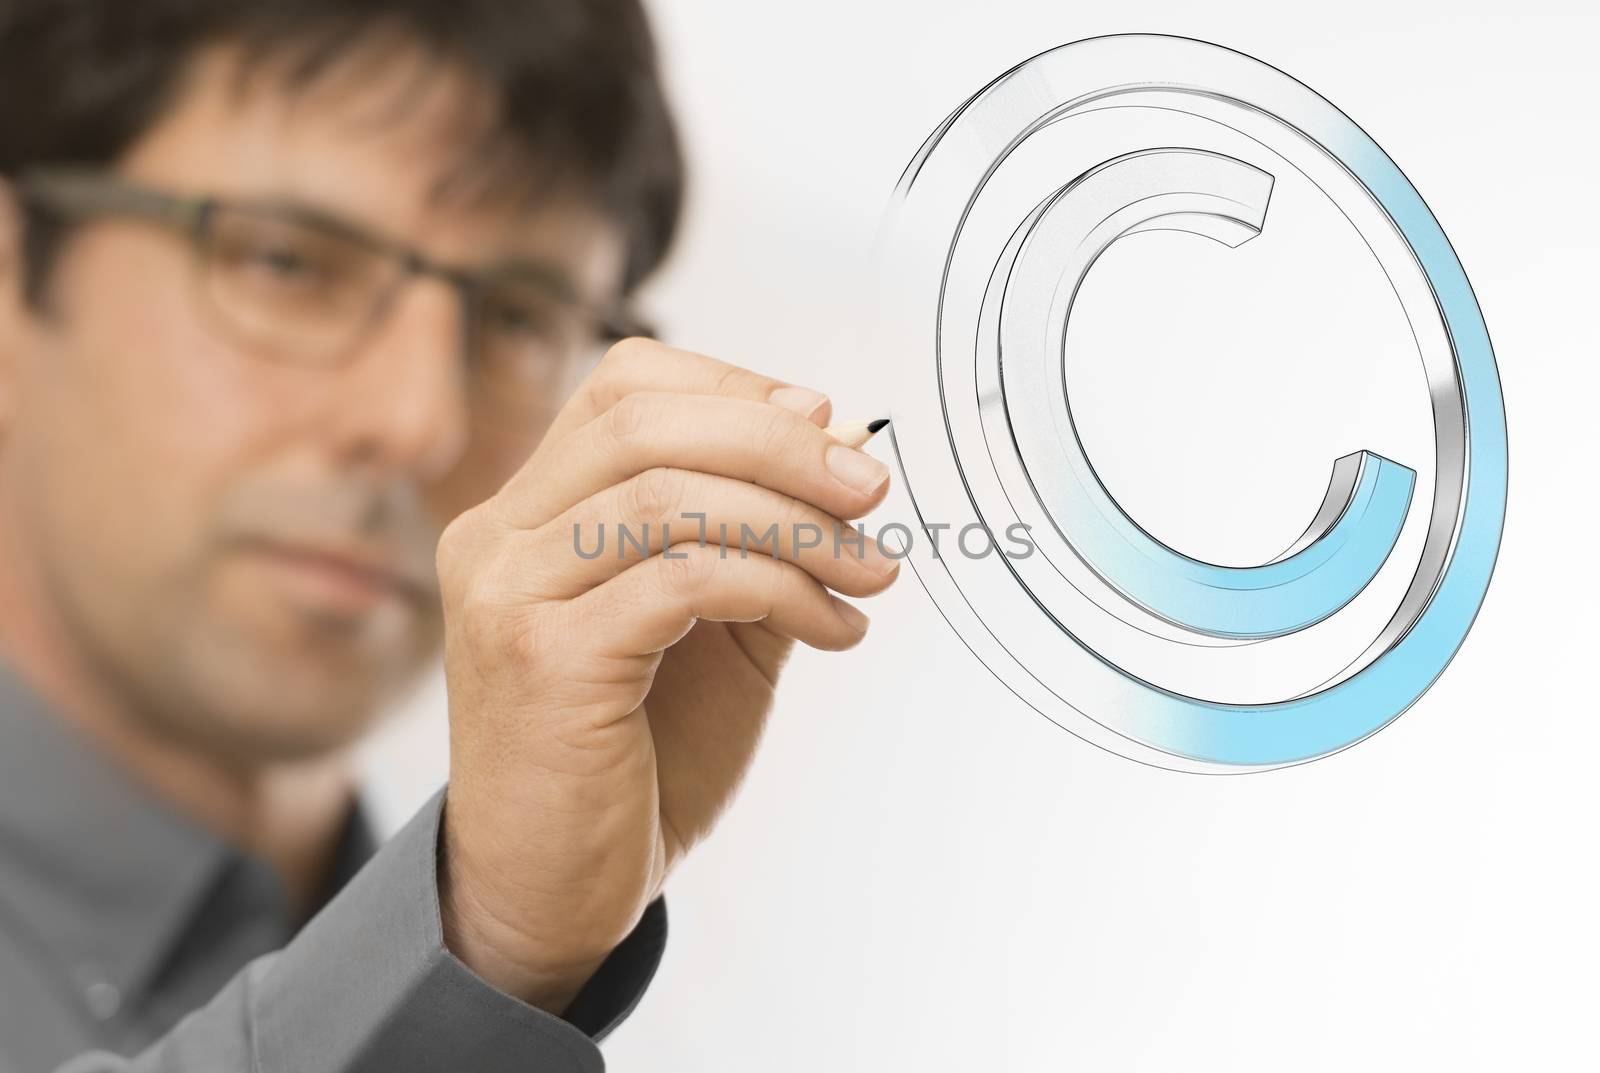 Creative man drawing copyright symbol on a transparent wall. Engineering background concept over white.